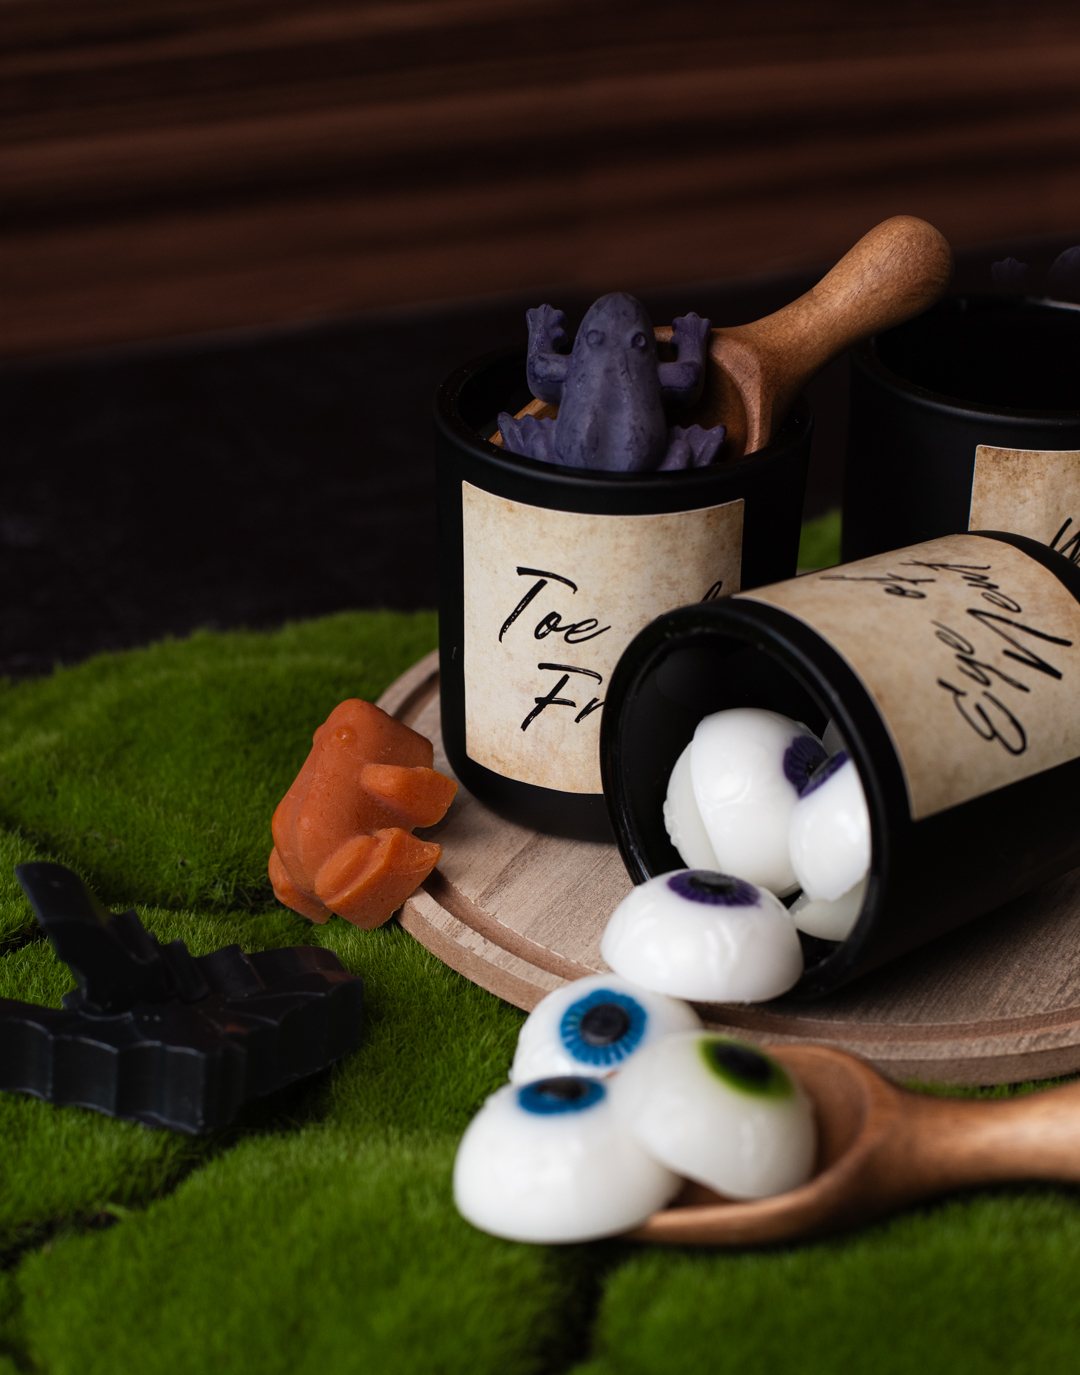 Wax melts inspired by witch's brew ingredients, eye of newt, toe of frog, and wool of bat. Pictured are eyeball wax melts with blue, green, and purple irises, frog wax melts dyed orange and purple, and bat wax melts dyed black.